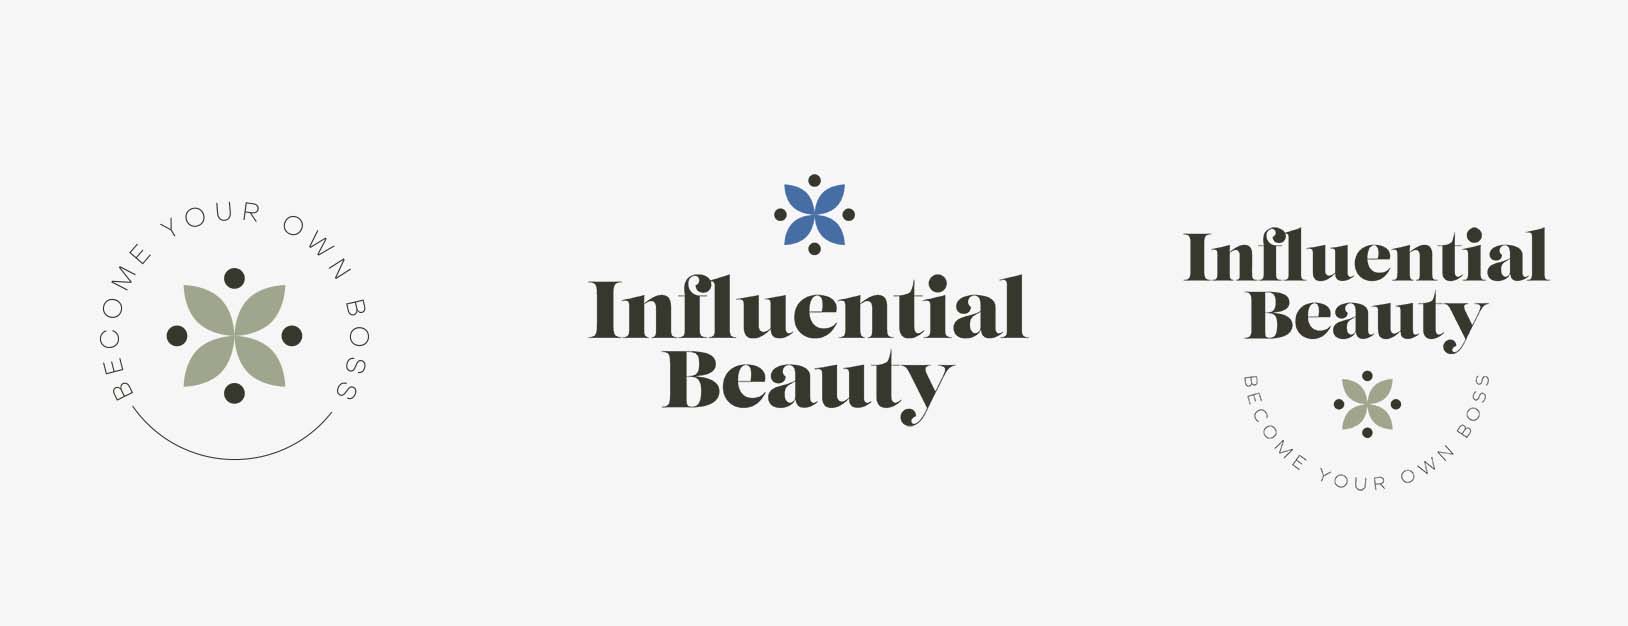 Influential beauty logo iterations